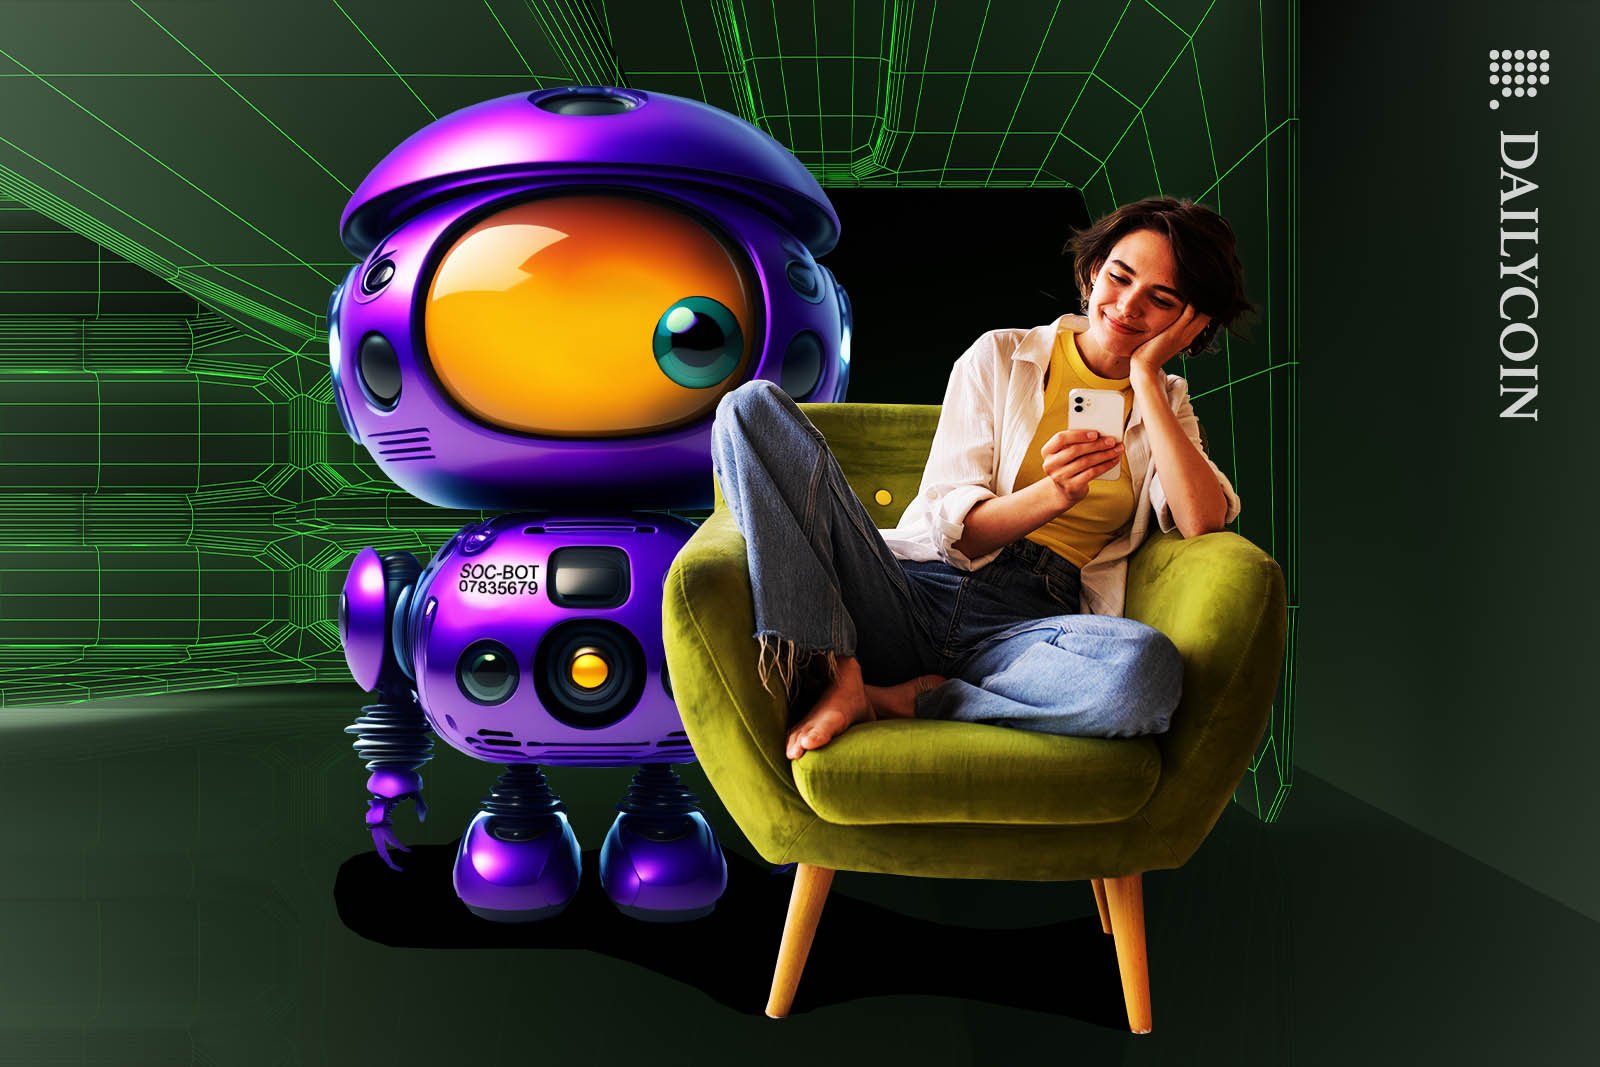 Large robot with giant eyes watching a woman sitting in a chair scrolling her phone.